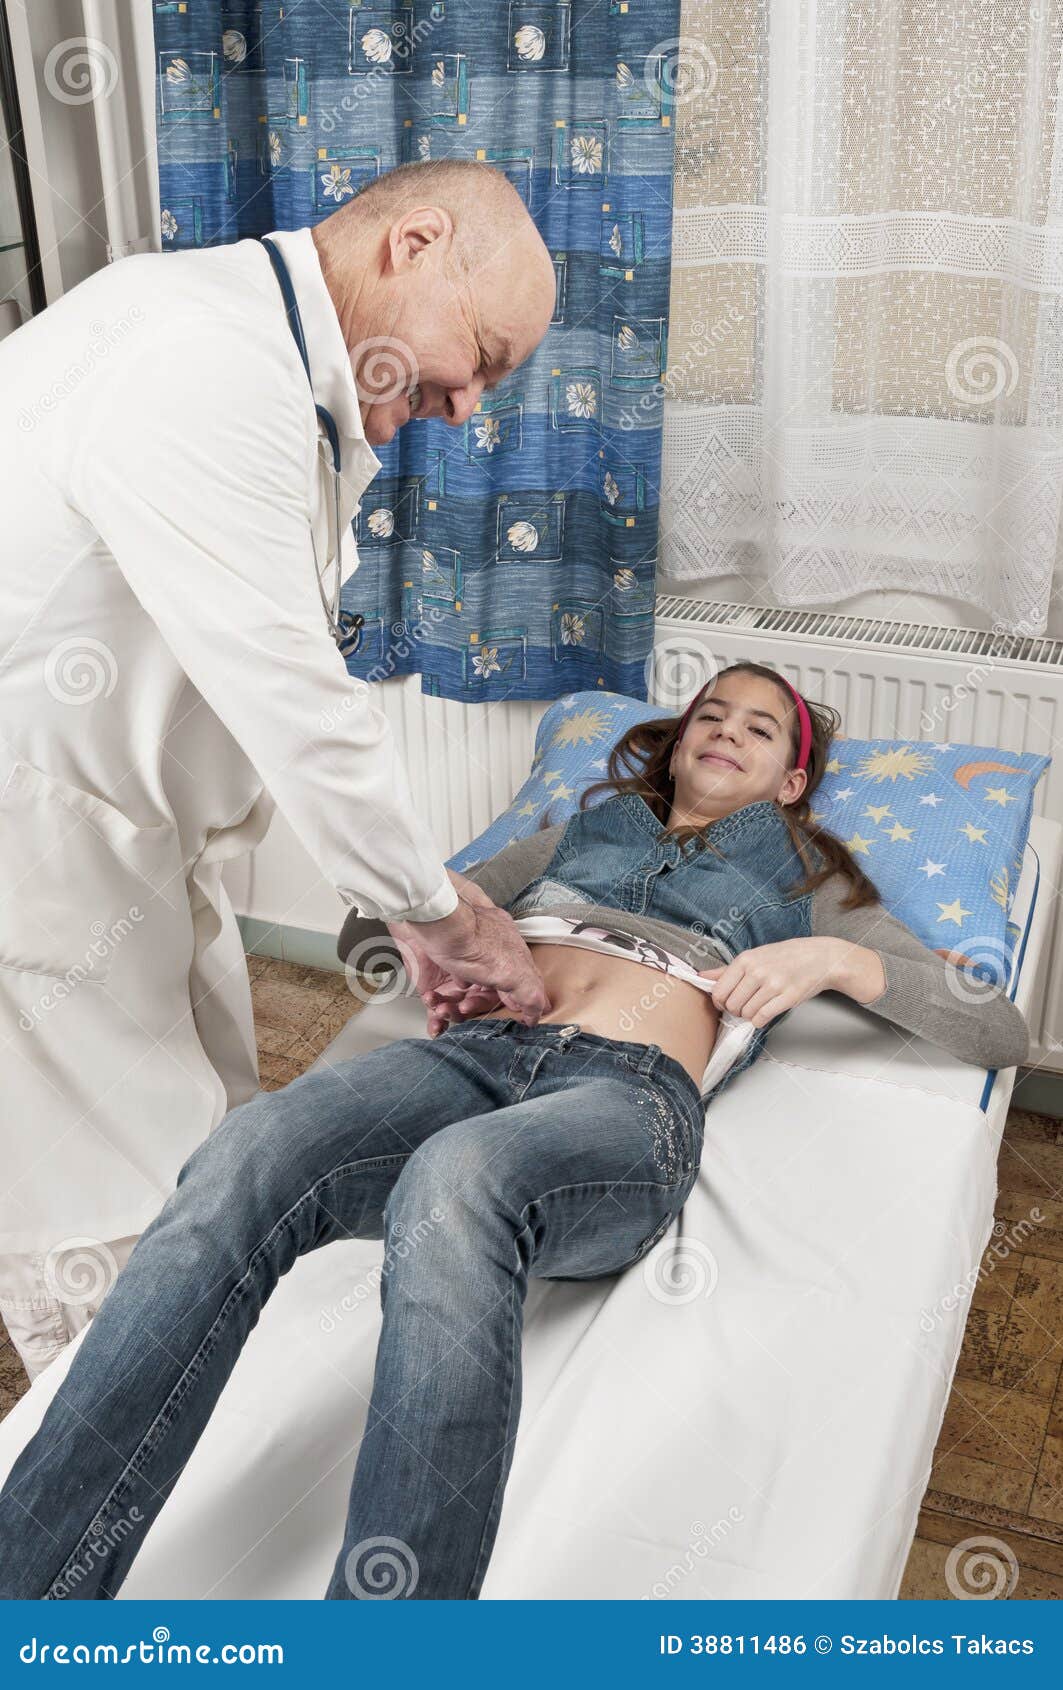 Doctor Have A Medical Examination Girl Stock Photo - Image 